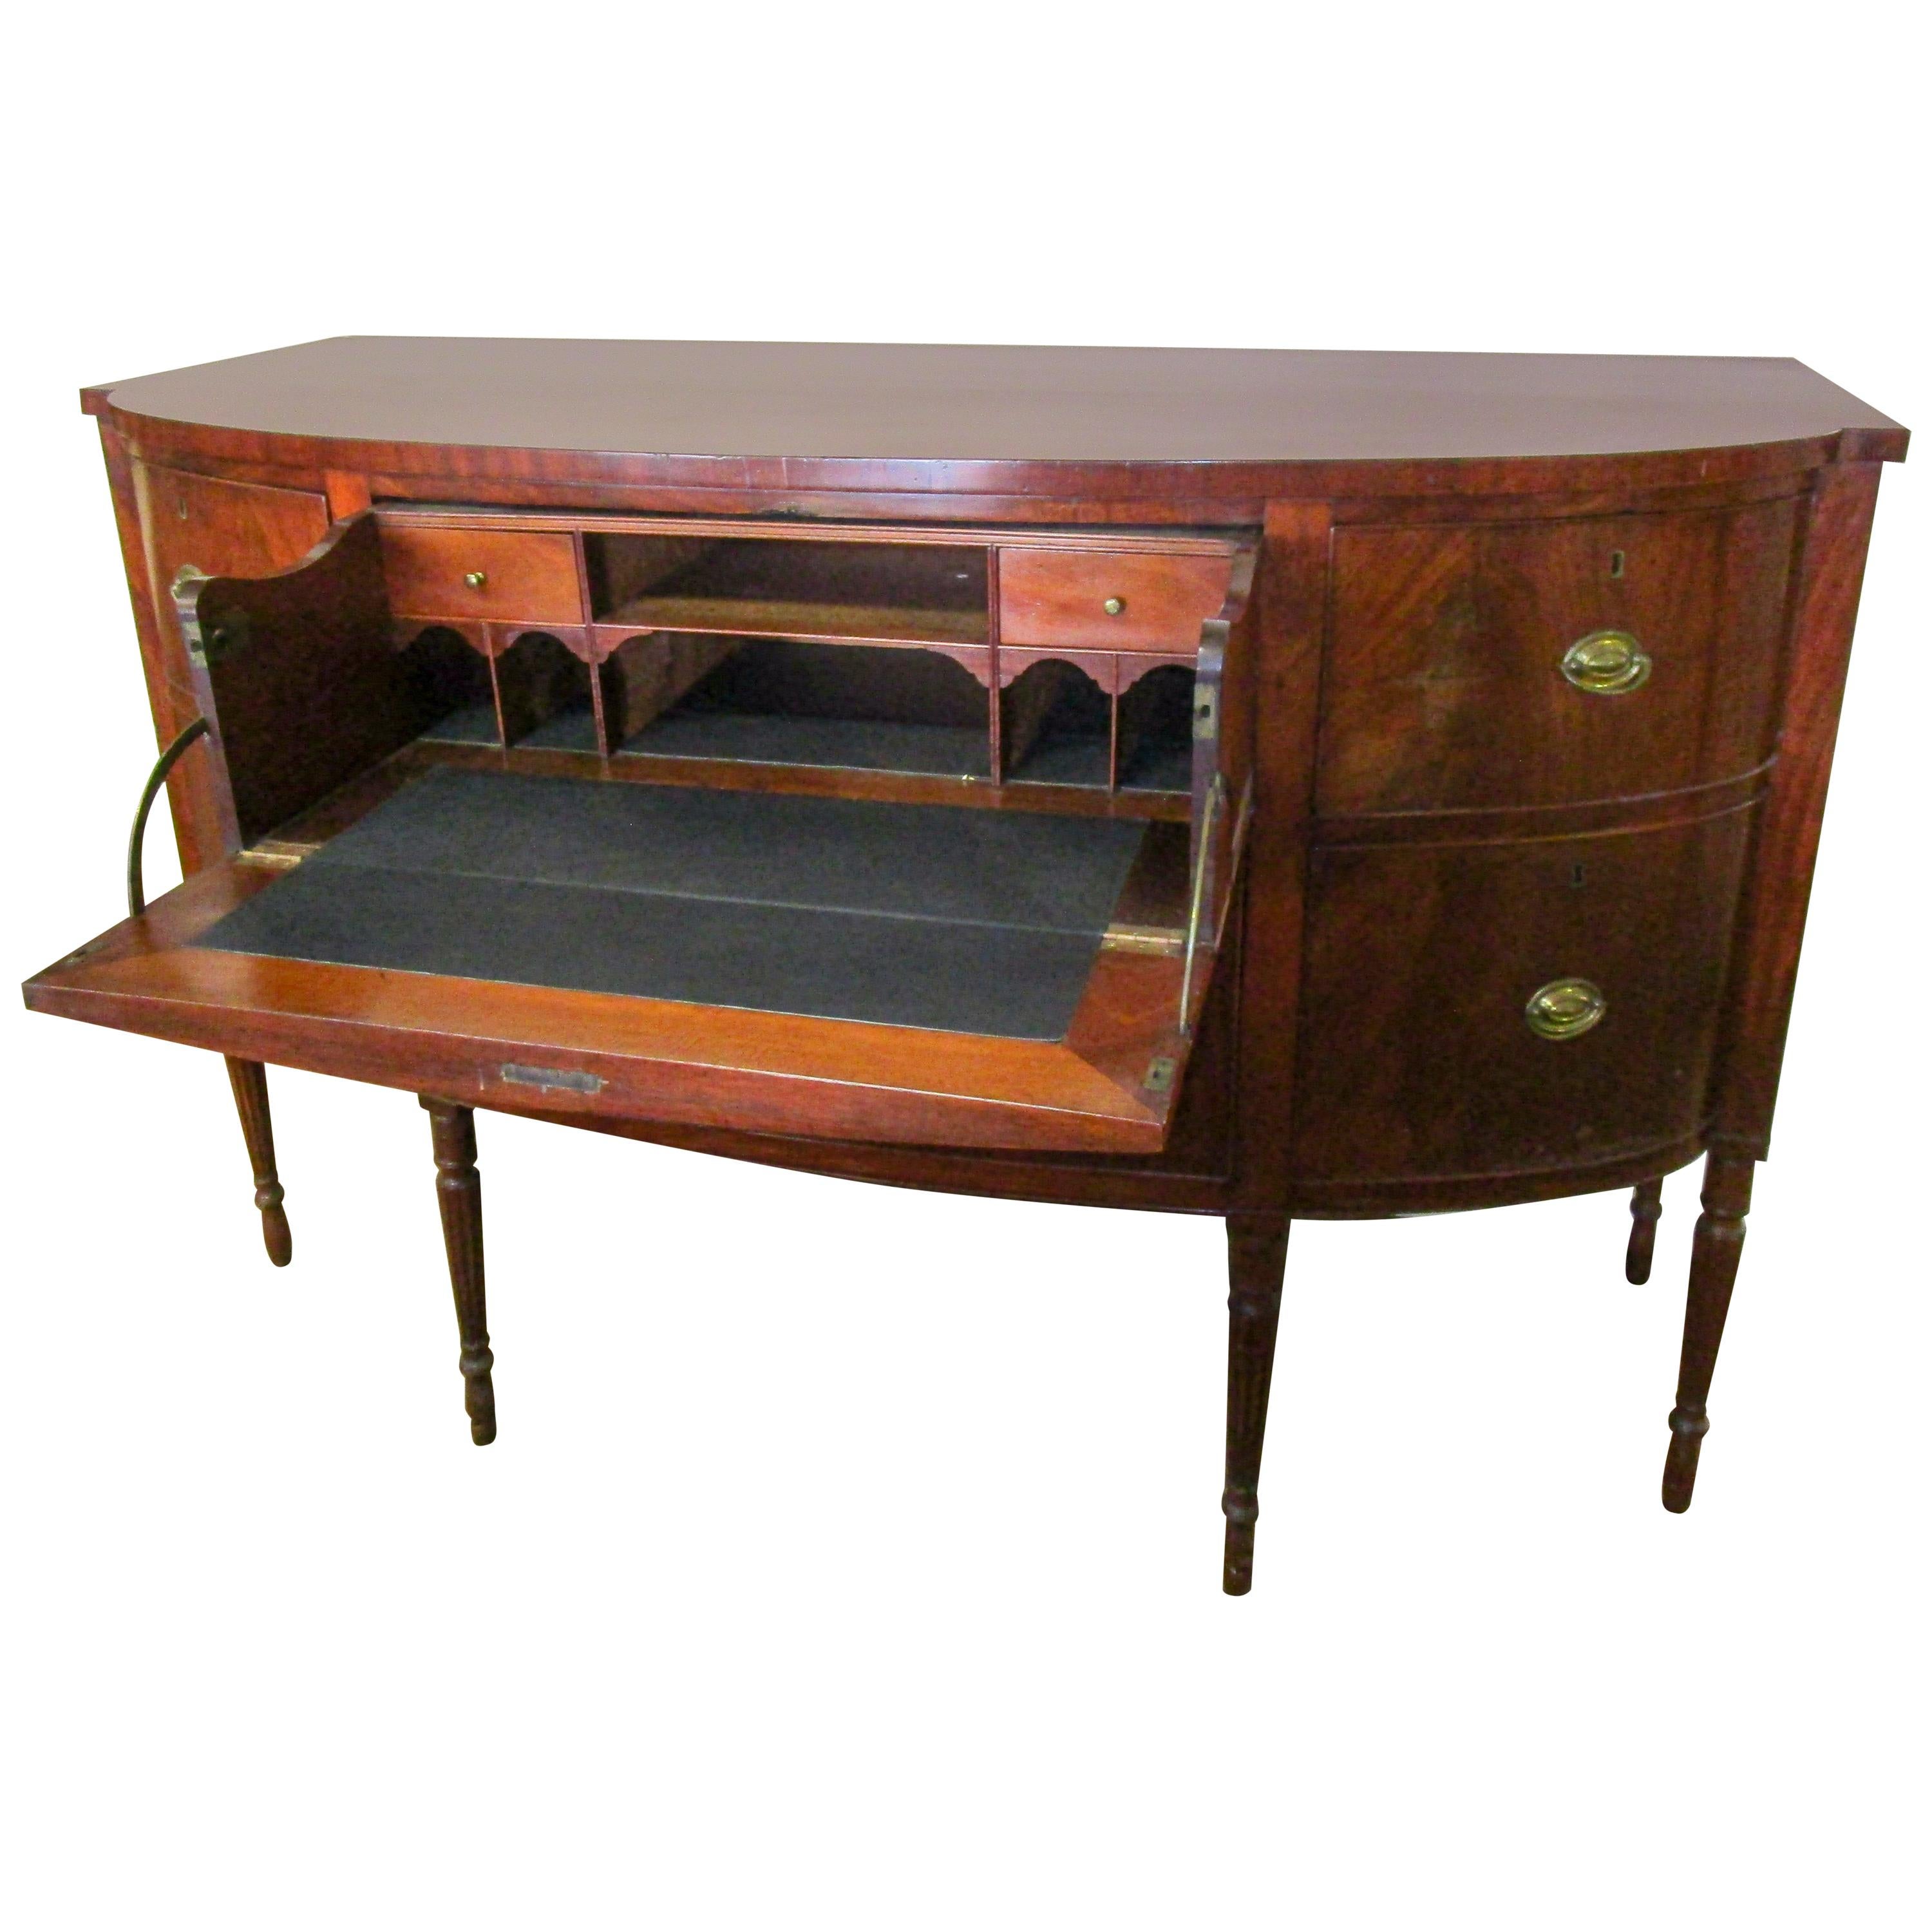 Early 19th Century Sheraton Style American Bowfront Sideboard with Dropdown Desk For Sale